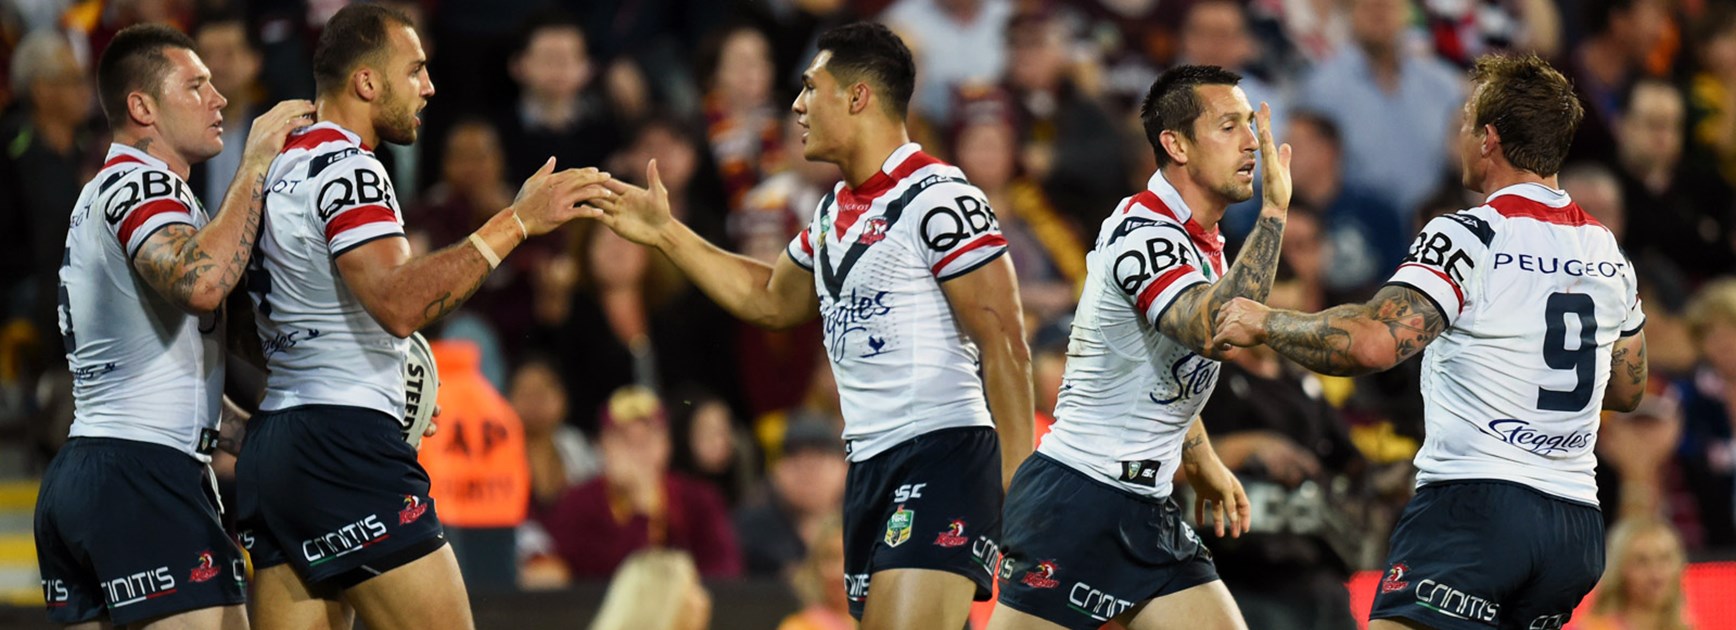 Blake Ferguson scored two tries in the Roosters' preliminary final loss to the Broncos.